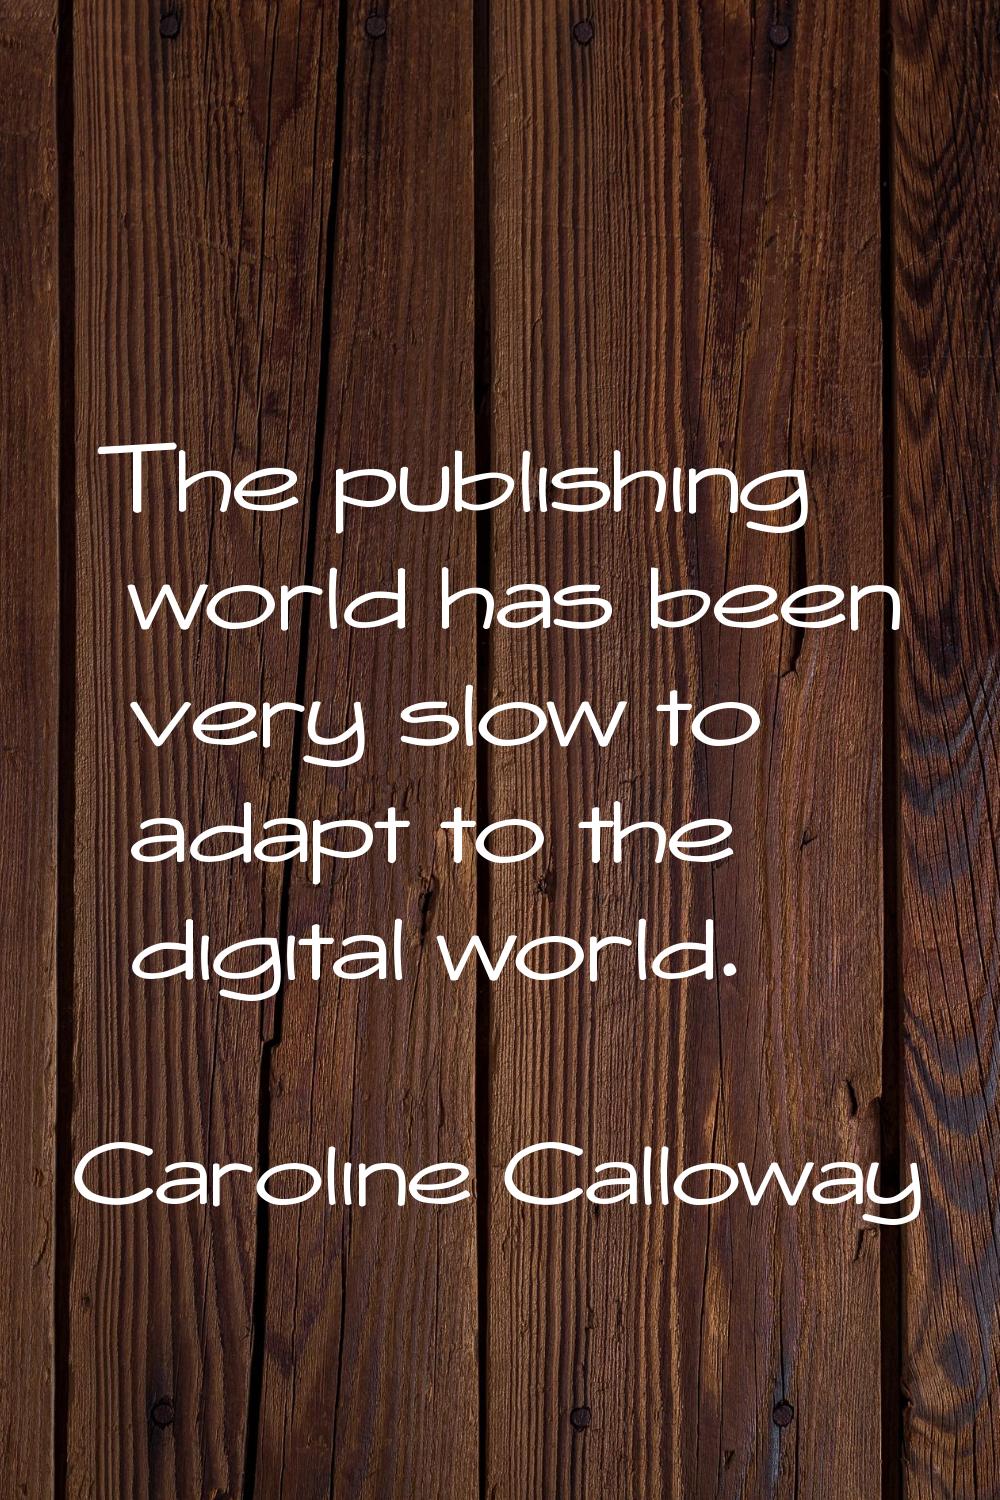 The publishing world has been very slow to adapt to the digital world.